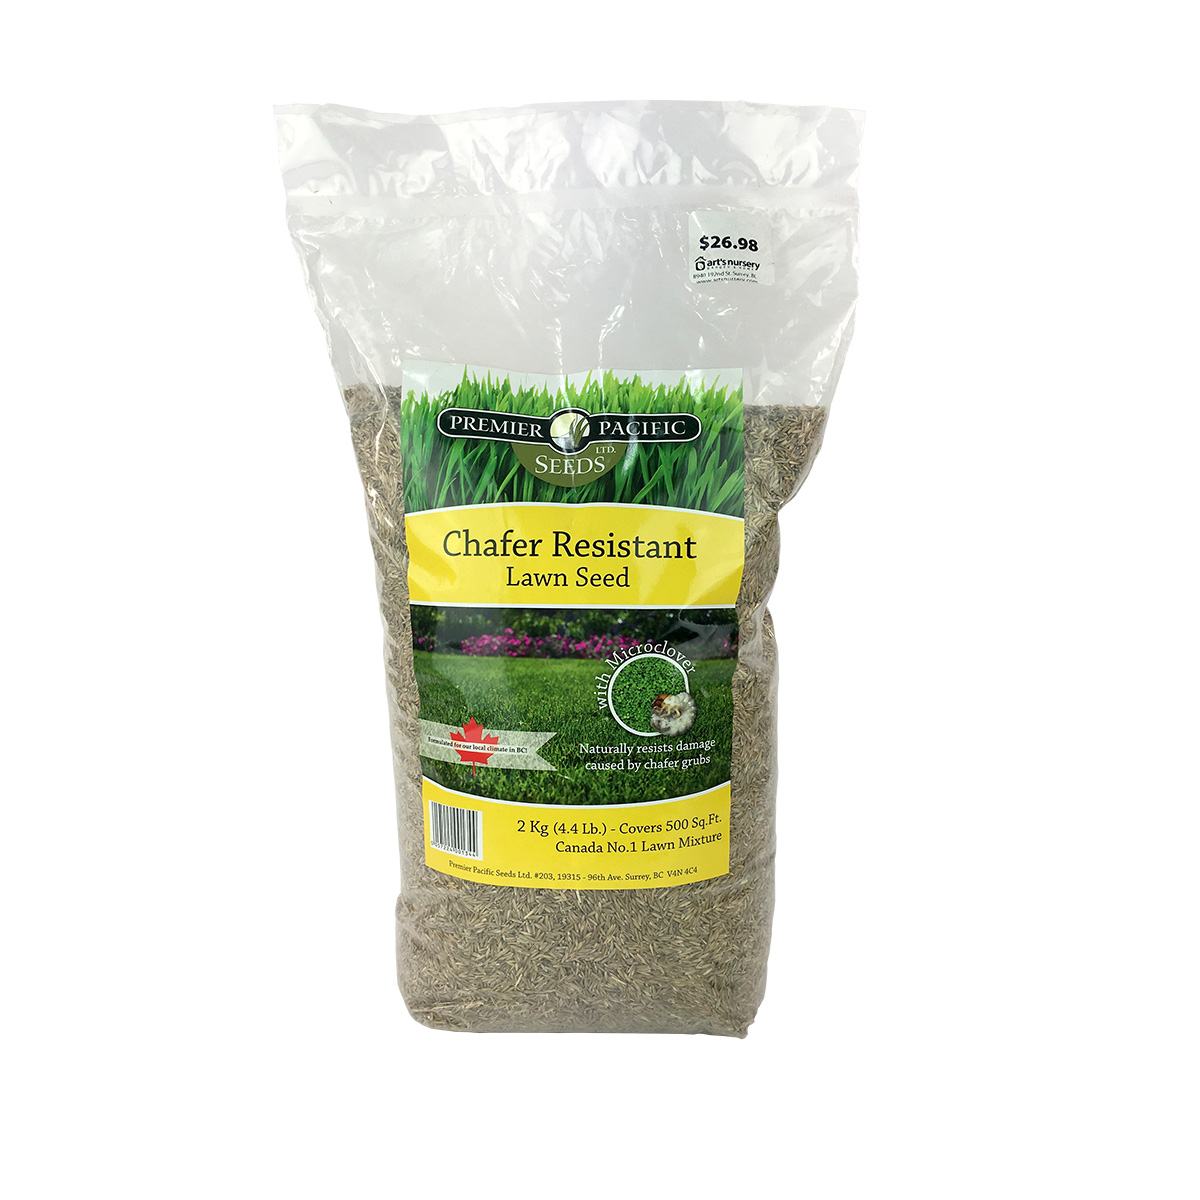 Premier Pacific Chafer Resistant Lawn Seed Mix 2kg